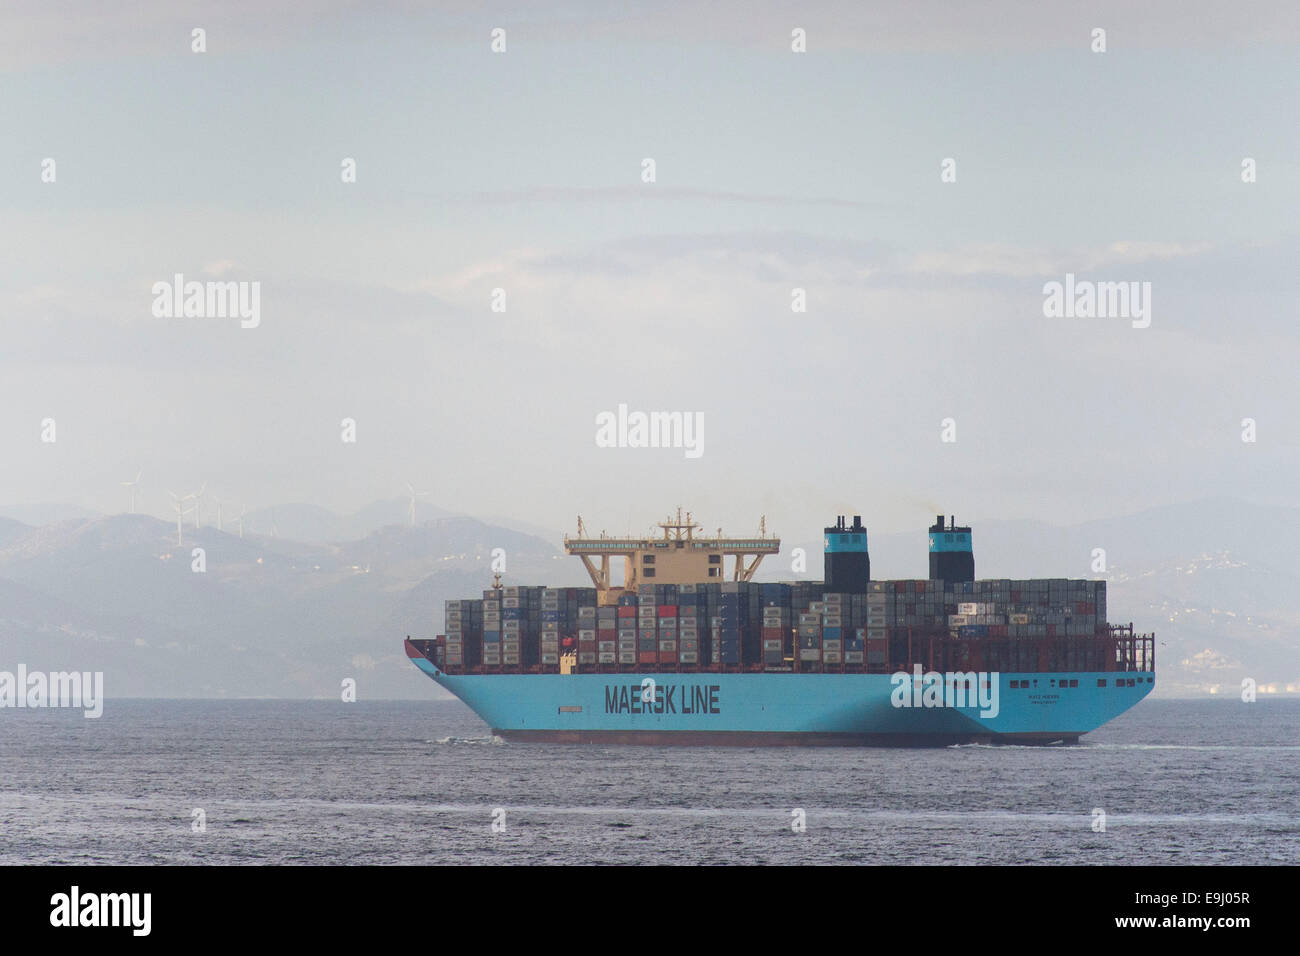 Maersk line transport ship at sea carrying shipping and cargo containers for import and export. Stock Photo